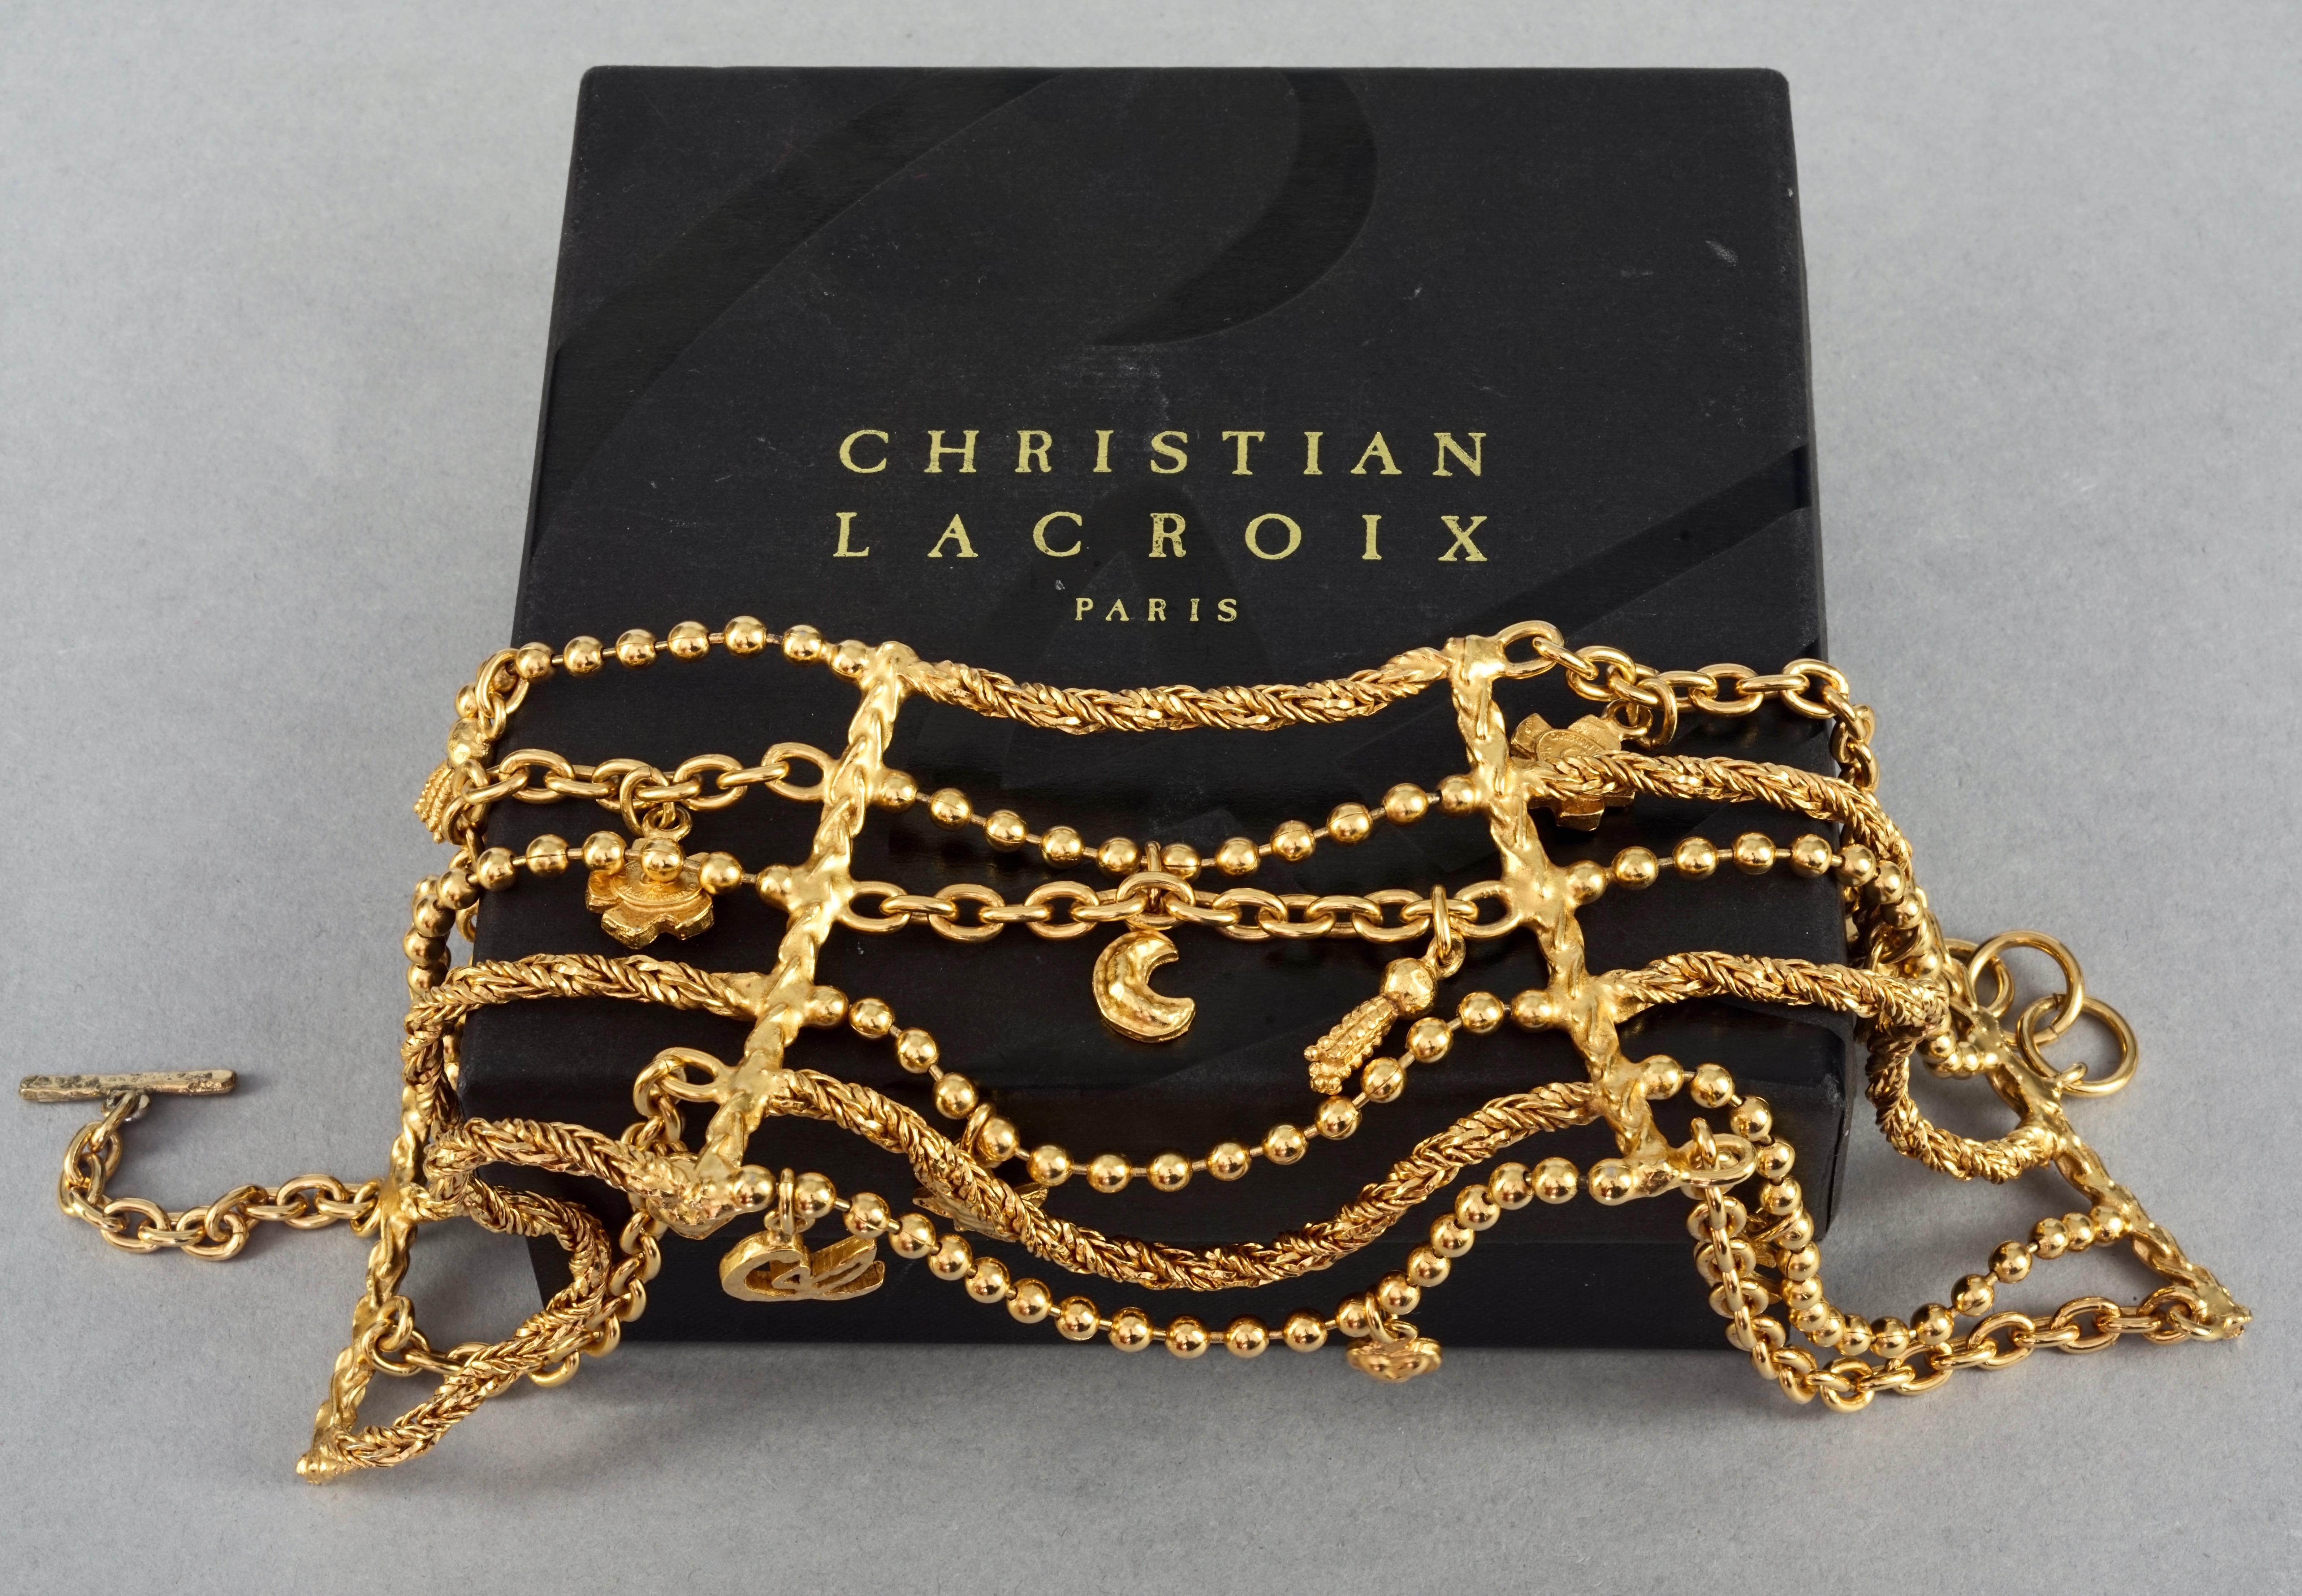 Vintage CHRISTIAN LACROIX Multi Layer Iconic Charm Choker Necklace

Measurements:
Height: 3.74 inches (9.5 cm)
Wearable Length: 13.38 inches to 14.17 inches (34cm to 36 cm)

Features:
- 100% Authentic CHRISTIAN LACROIX.
- 6 tiered alternating chains